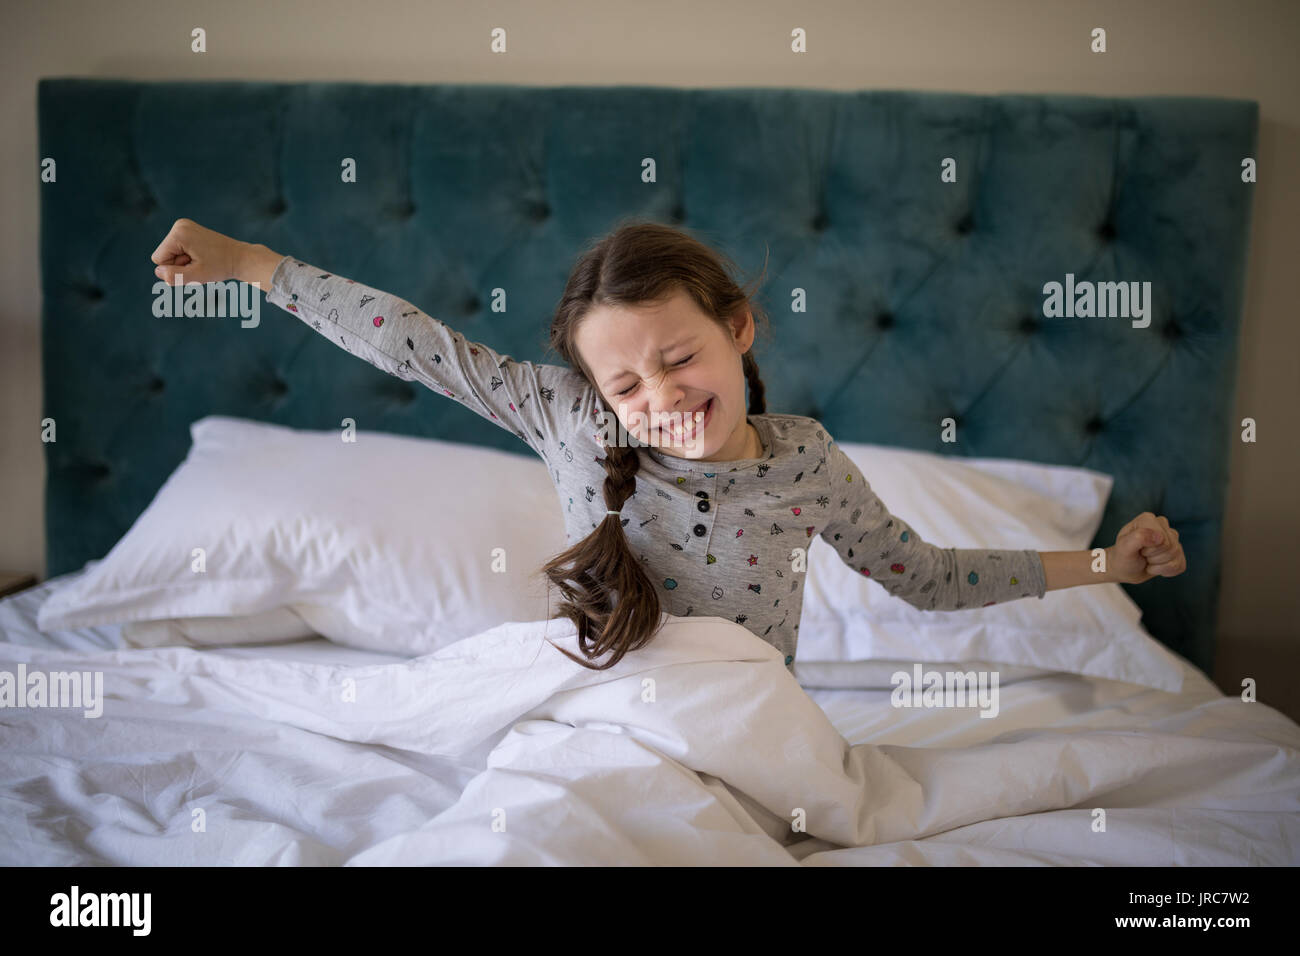 Girl stretching her arms while waking up in bedroom at home Stock Photo